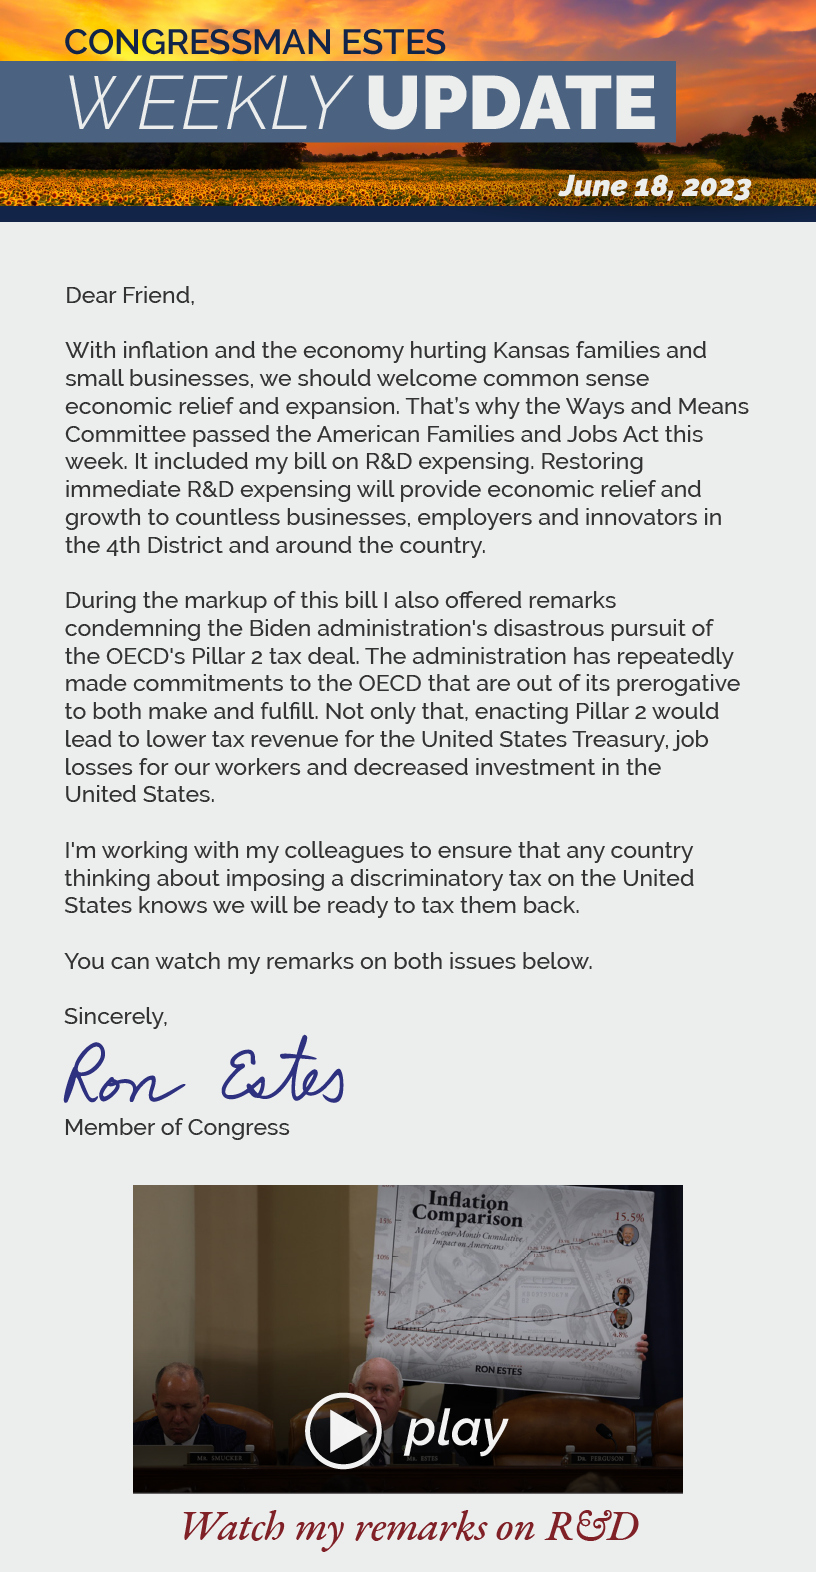 Dear Friend,  With inflation and the economy hurting Kansas families and small businesses, we should welcome common sense economic relief and expansion. That’s why the Ways and Means Committee passed the American Families and Jobs Act this week. It included my bill on R&D expensing. Restoring immediate R&D expensing will provide economic relief and growth to countless businesses, employers and innovators in the 4th District and around the country.   During the markup of this bill I also offered remarks condemning the Biden administration's disastrous pursuit of the OECD's Pillar 2 tax deal. The administration has repeatedly made commitments to the OECD that are out of its prerogative to both make and fulfill. Not only that, enacting Pillar 2 would lead to lower tax revenue for the United States Treasury, job losses for our workers and decreased investment in the United States.  I'm working with my colleagues to ensure that any country thinking about imposing a discriminatory tax on the United States knows we will be ready to tax them back.  You can watch my remarks on both issues below.  Sincerely, Ron Estes  LINK: https://youtu.be/D9i6SguxOHY